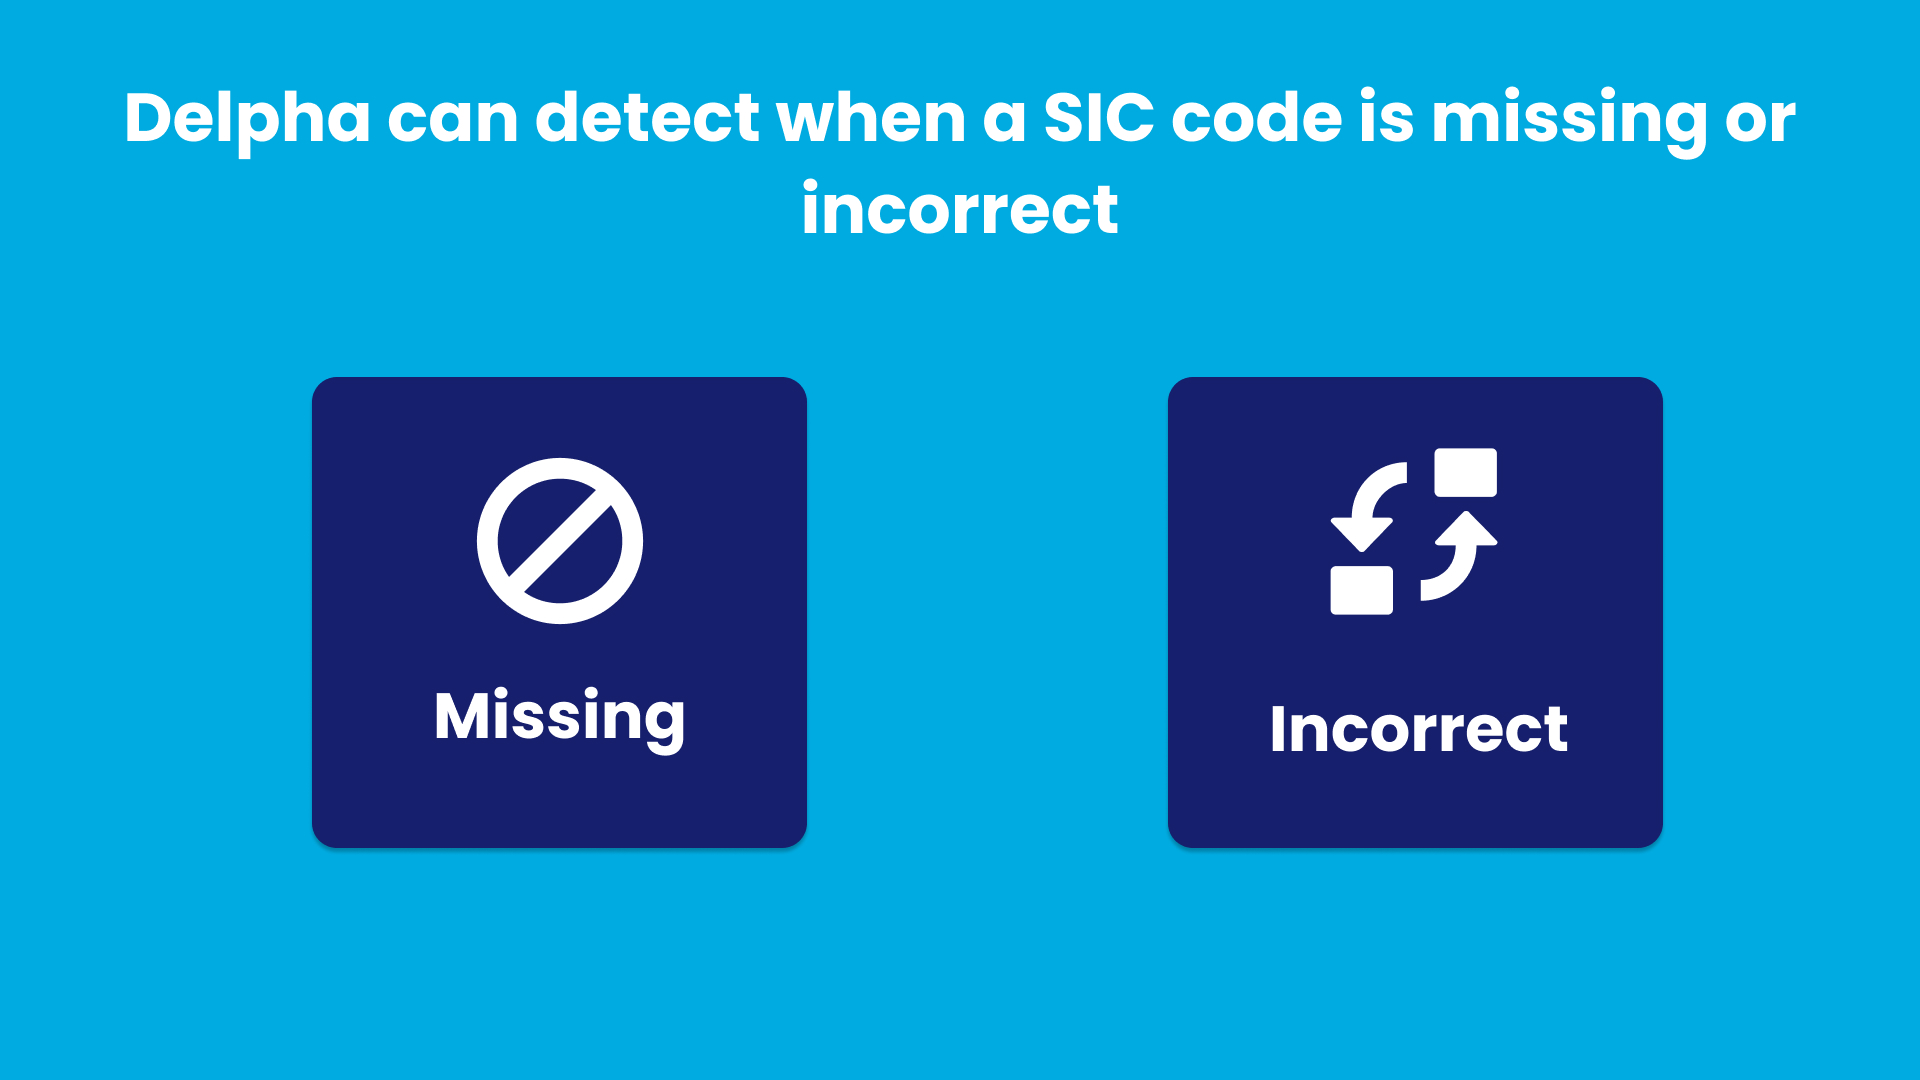 Delpha can help generate the correct SIC code regardless if it’s missing entirely or inputted incorrectly.